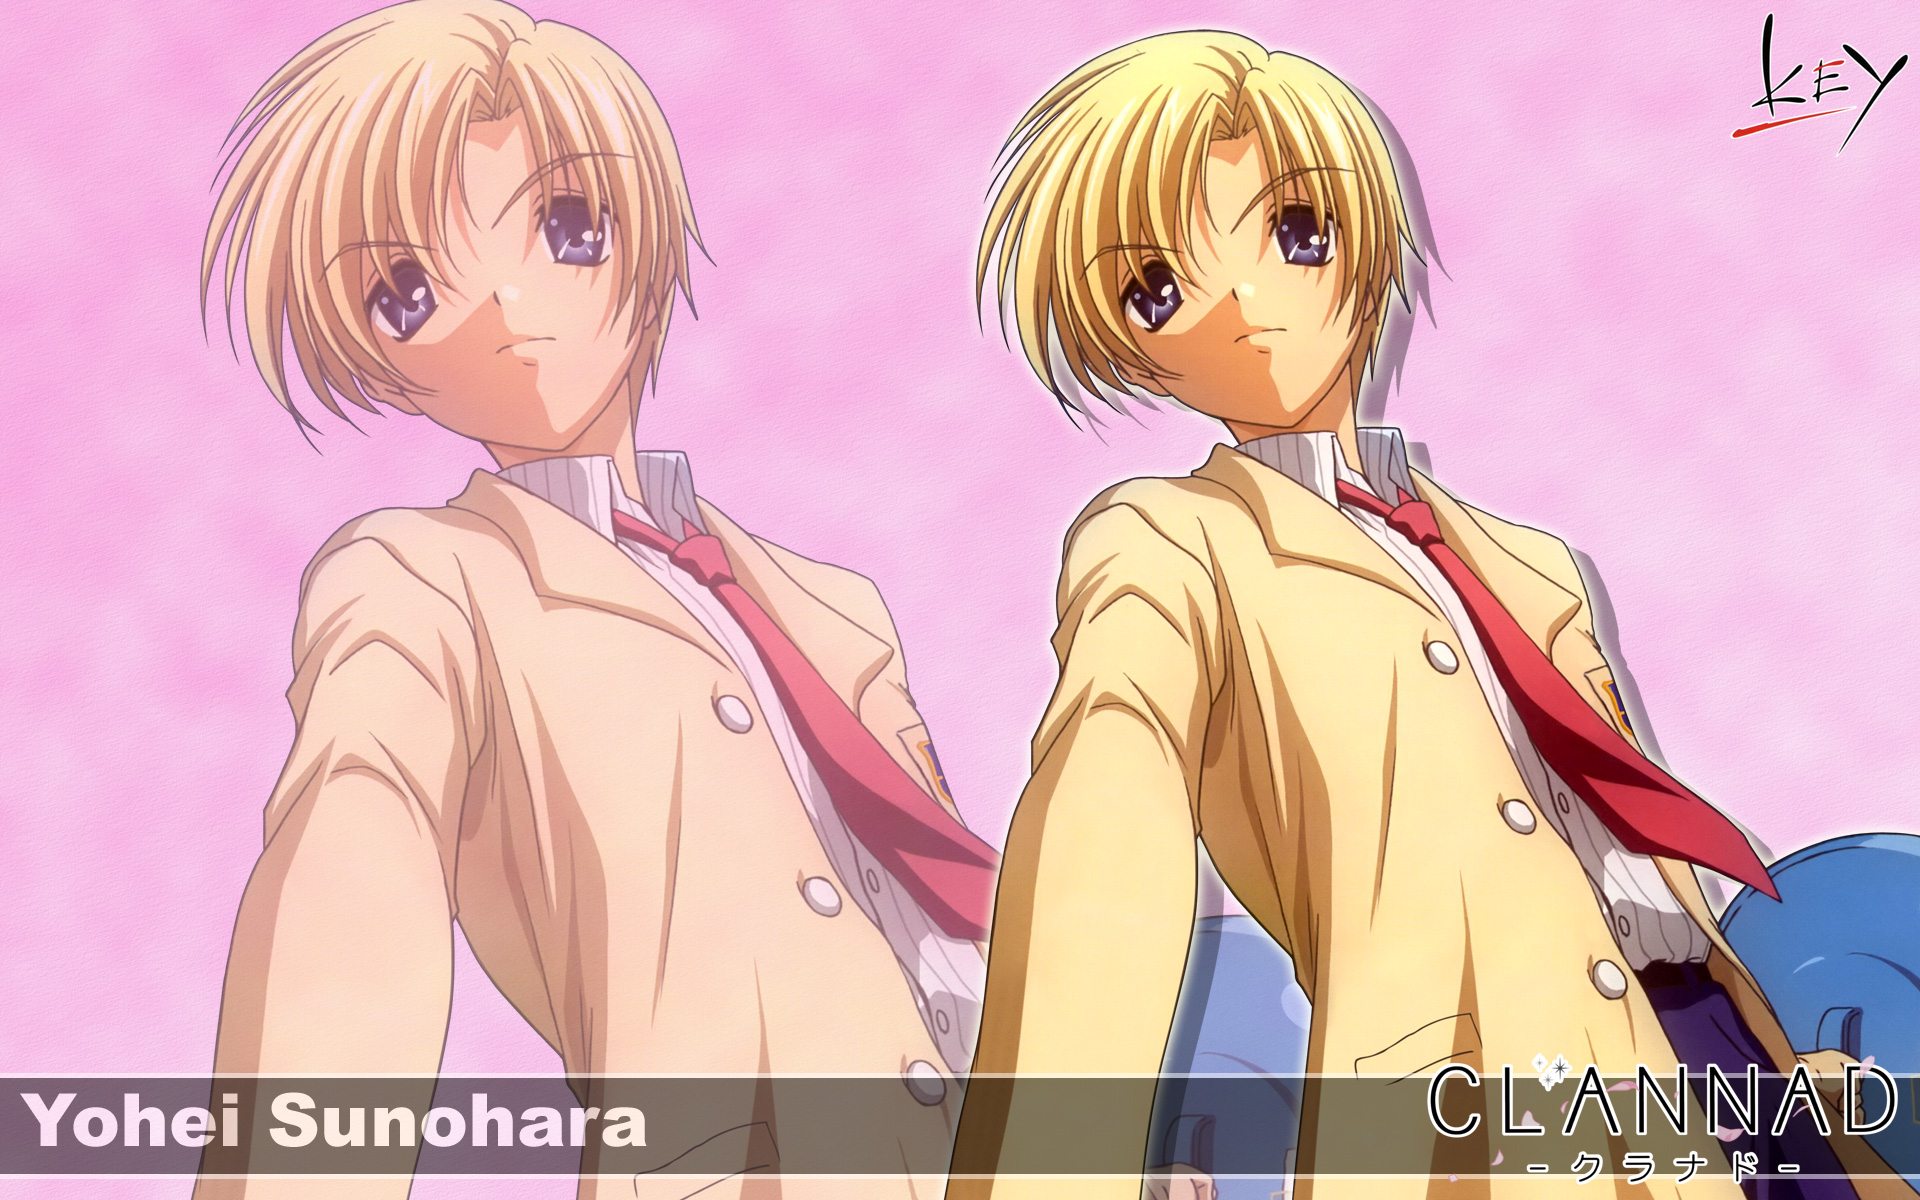 Youhei Sunohara from Clannad, a popular anime character, set as a desktop wallpaper.